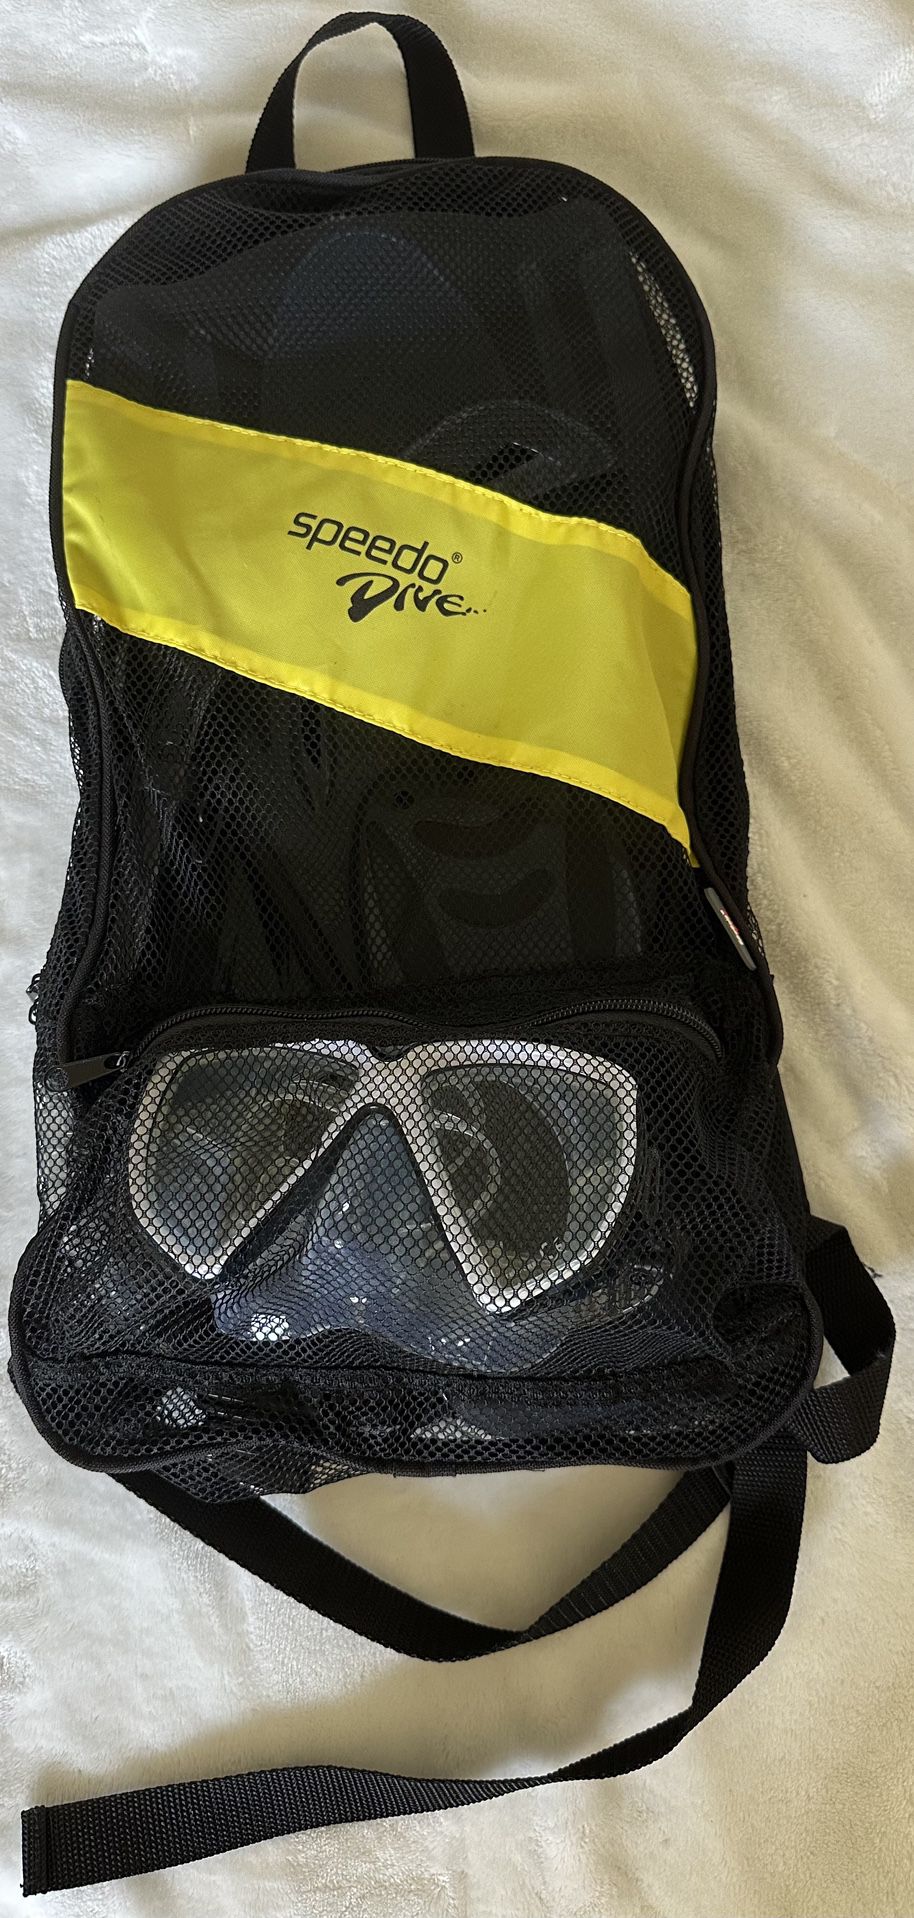 Speedo dive, mask, snorkel, fins, and backpack style carrying case